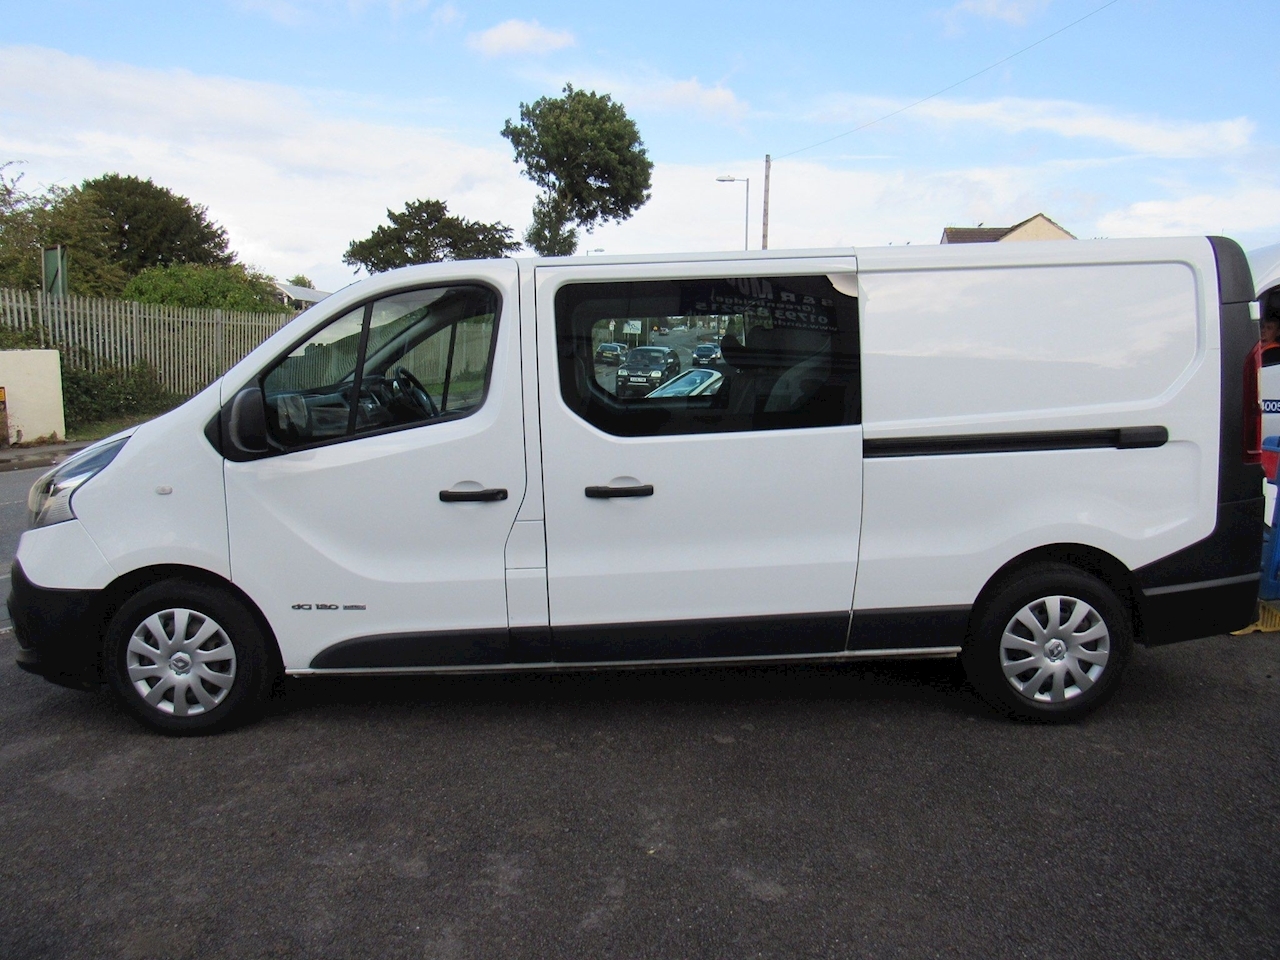 Trafic Ll29 Business Energy Dci S/R W/V Van With Side Windows 1.6 Manual Diesel